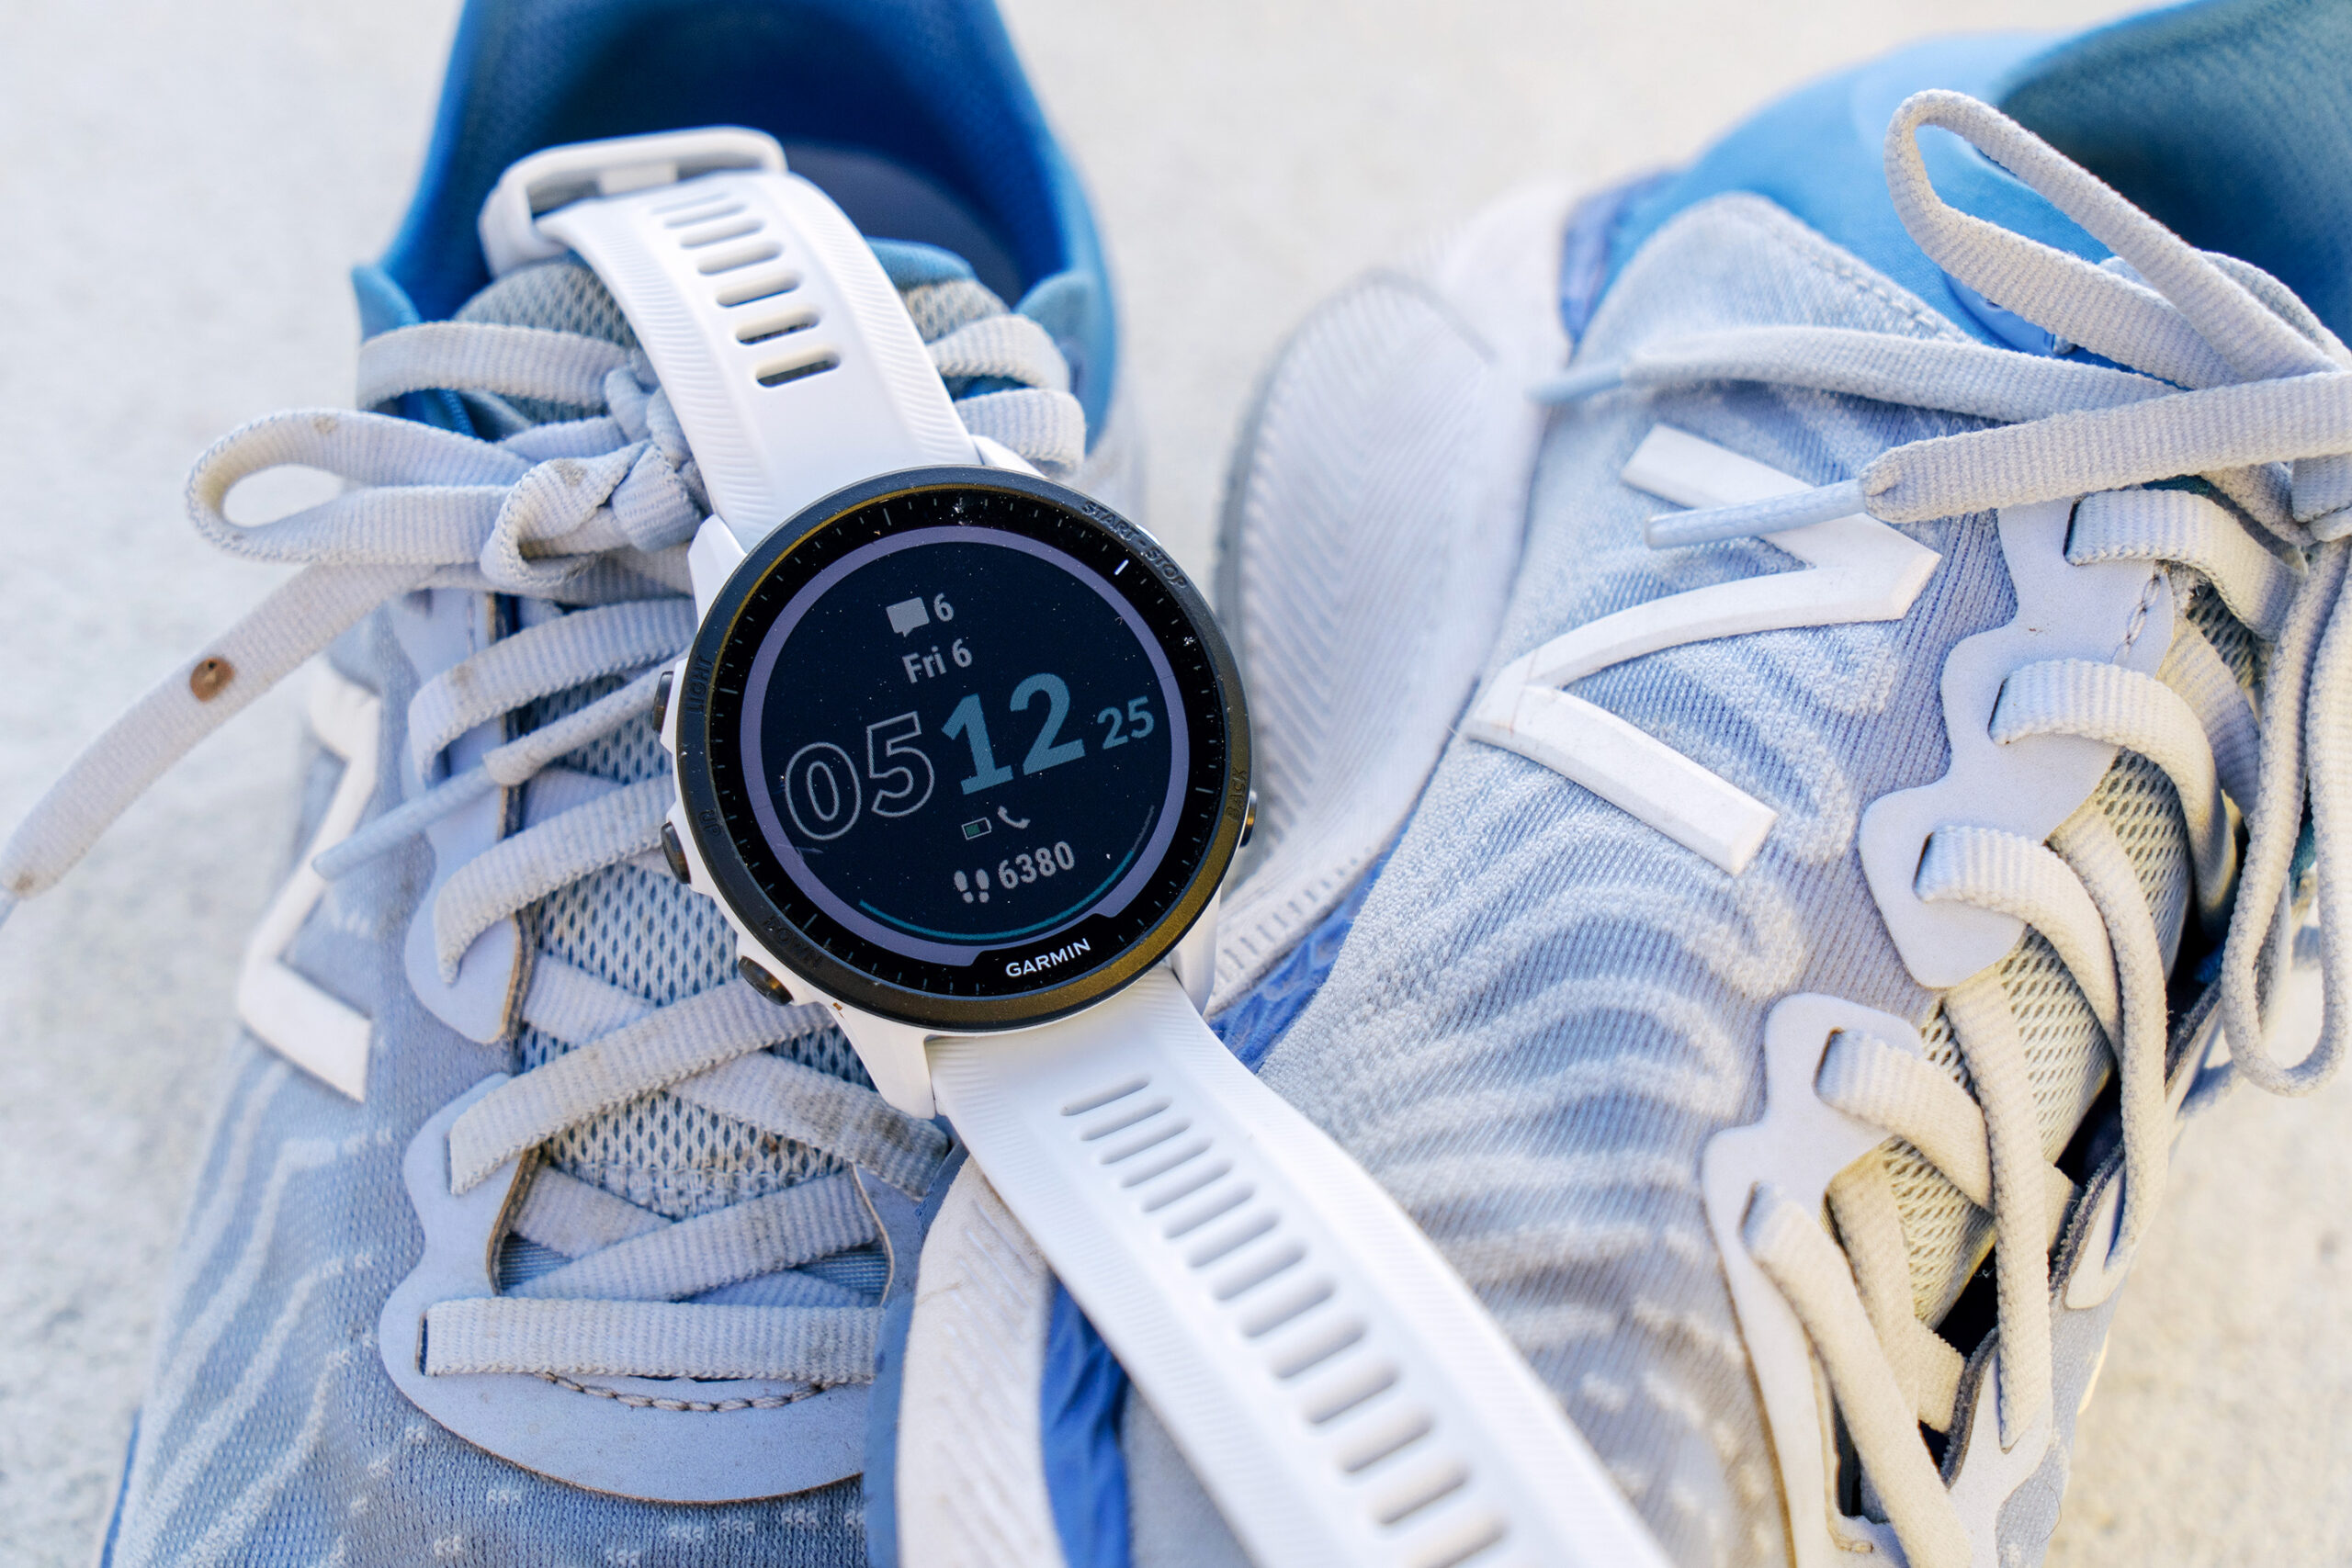 Don't hold your breath for the Garmin Forerunner 255 – we don't really need  it